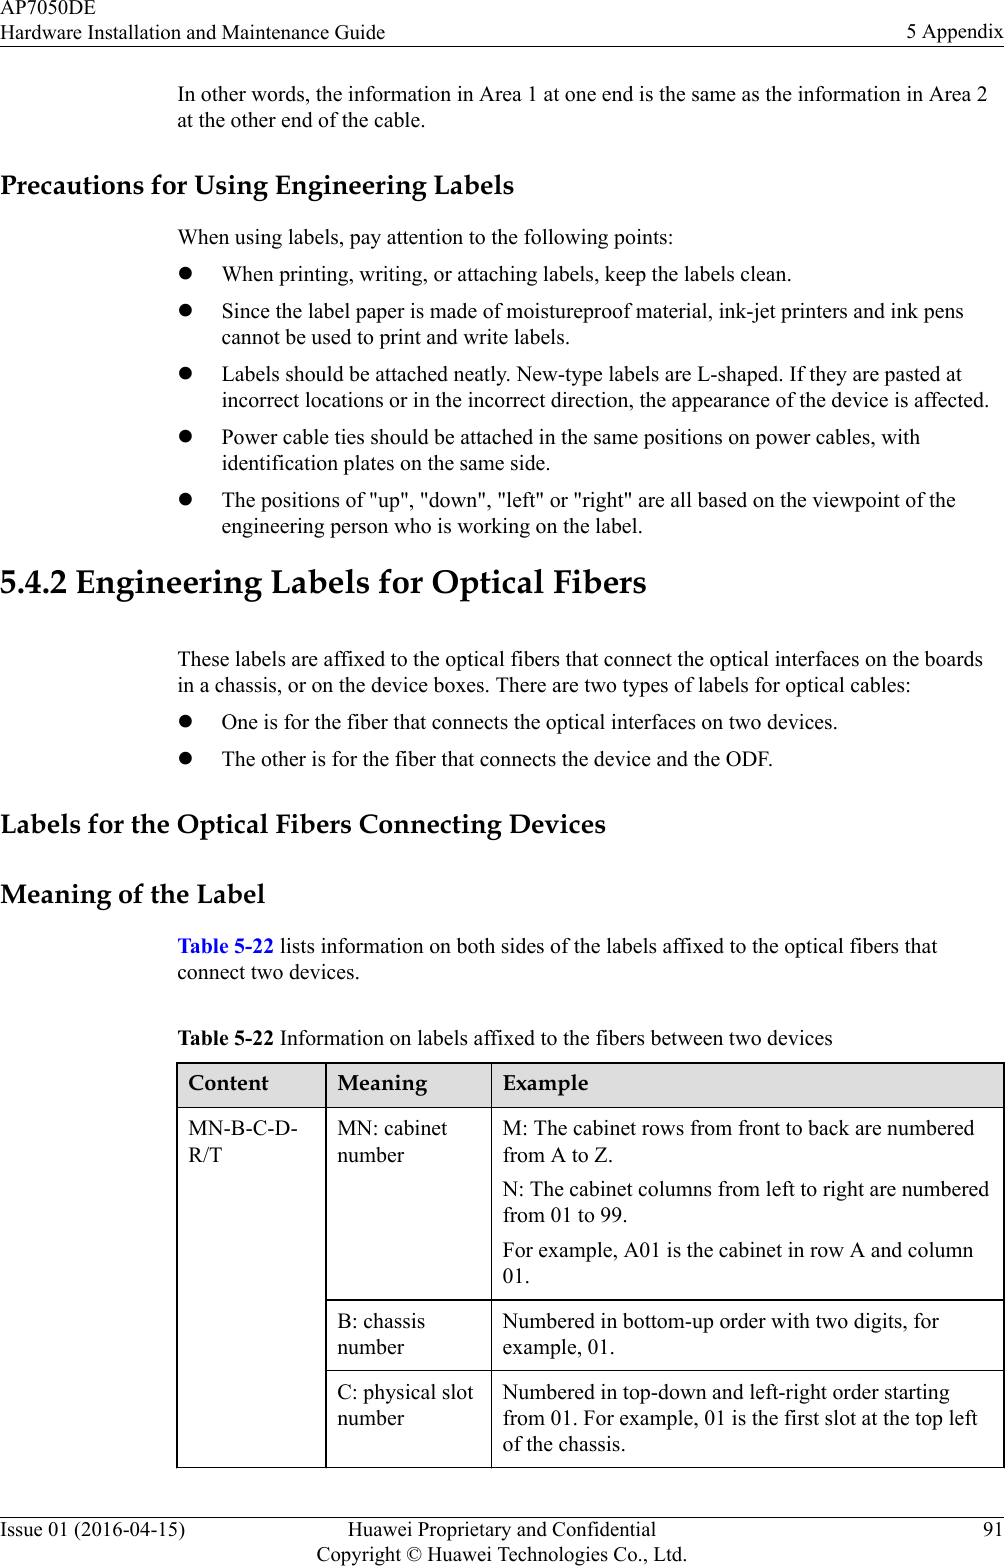 In other words, the information in Area 1 at one end is the same as the information in Area 2at the other end of the cable.Precautions for Using Engineering LabelsWhen using labels, pay attention to the following points:lWhen printing, writing, or attaching labels, keep the labels clean.lSince the label paper is made of moistureproof material, ink-jet printers and ink penscannot be used to print and write labels.lLabels should be attached neatly. New-type labels are L-shaped. If they are pasted atincorrect locations or in the incorrect direction, the appearance of the device is affected.lPower cable ties should be attached in the same positions on power cables, withidentification plates on the same side.lThe positions of &quot;up&quot;, &quot;down&quot;, &quot;left&quot; or &quot;right&quot; are all based on the viewpoint of theengineering person who is working on the label.5.4.2 Engineering Labels for Optical FibersThese labels are affixed to the optical fibers that connect the optical interfaces on the boardsin a chassis, or on the device boxes. There are two types of labels for optical cables:lOne is for the fiber that connects the optical interfaces on two devices.lThe other is for the fiber that connects the device and the ODF.Labels for the Optical Fibers Connecting DevicesMeaning of the LabelTable 5-22 lists information on both sides of the labels affixed to the optical fibers thatconnect two devices.Table 5-22 Information on labels affixed to the fibers between two devicesContent Meaning ExampleMN-B-C-D-R/TMN: cabinetnumberM: The cabinet rows from front to back are numberedfrom A to Z.N: The cabinet columns from left to right are numberedfrom 01 to 99.For example, A01 is the cabinet in row A and column01.B: chassisnumberNumbered in bottom-up order with two digits, forexample, 01.C: physical slotnumberNumbered in top-down and left-right order startingfrom 01. For example, 01 is the first slot at the top leftof the chassis.AP7050DEHardware Installation and Maintenance Guide 5 AppendixIssue 01 (2016-04-15) Huawei Proprietary and ConfidentialCopyright © Huawei Technologies Co., Ltd.91